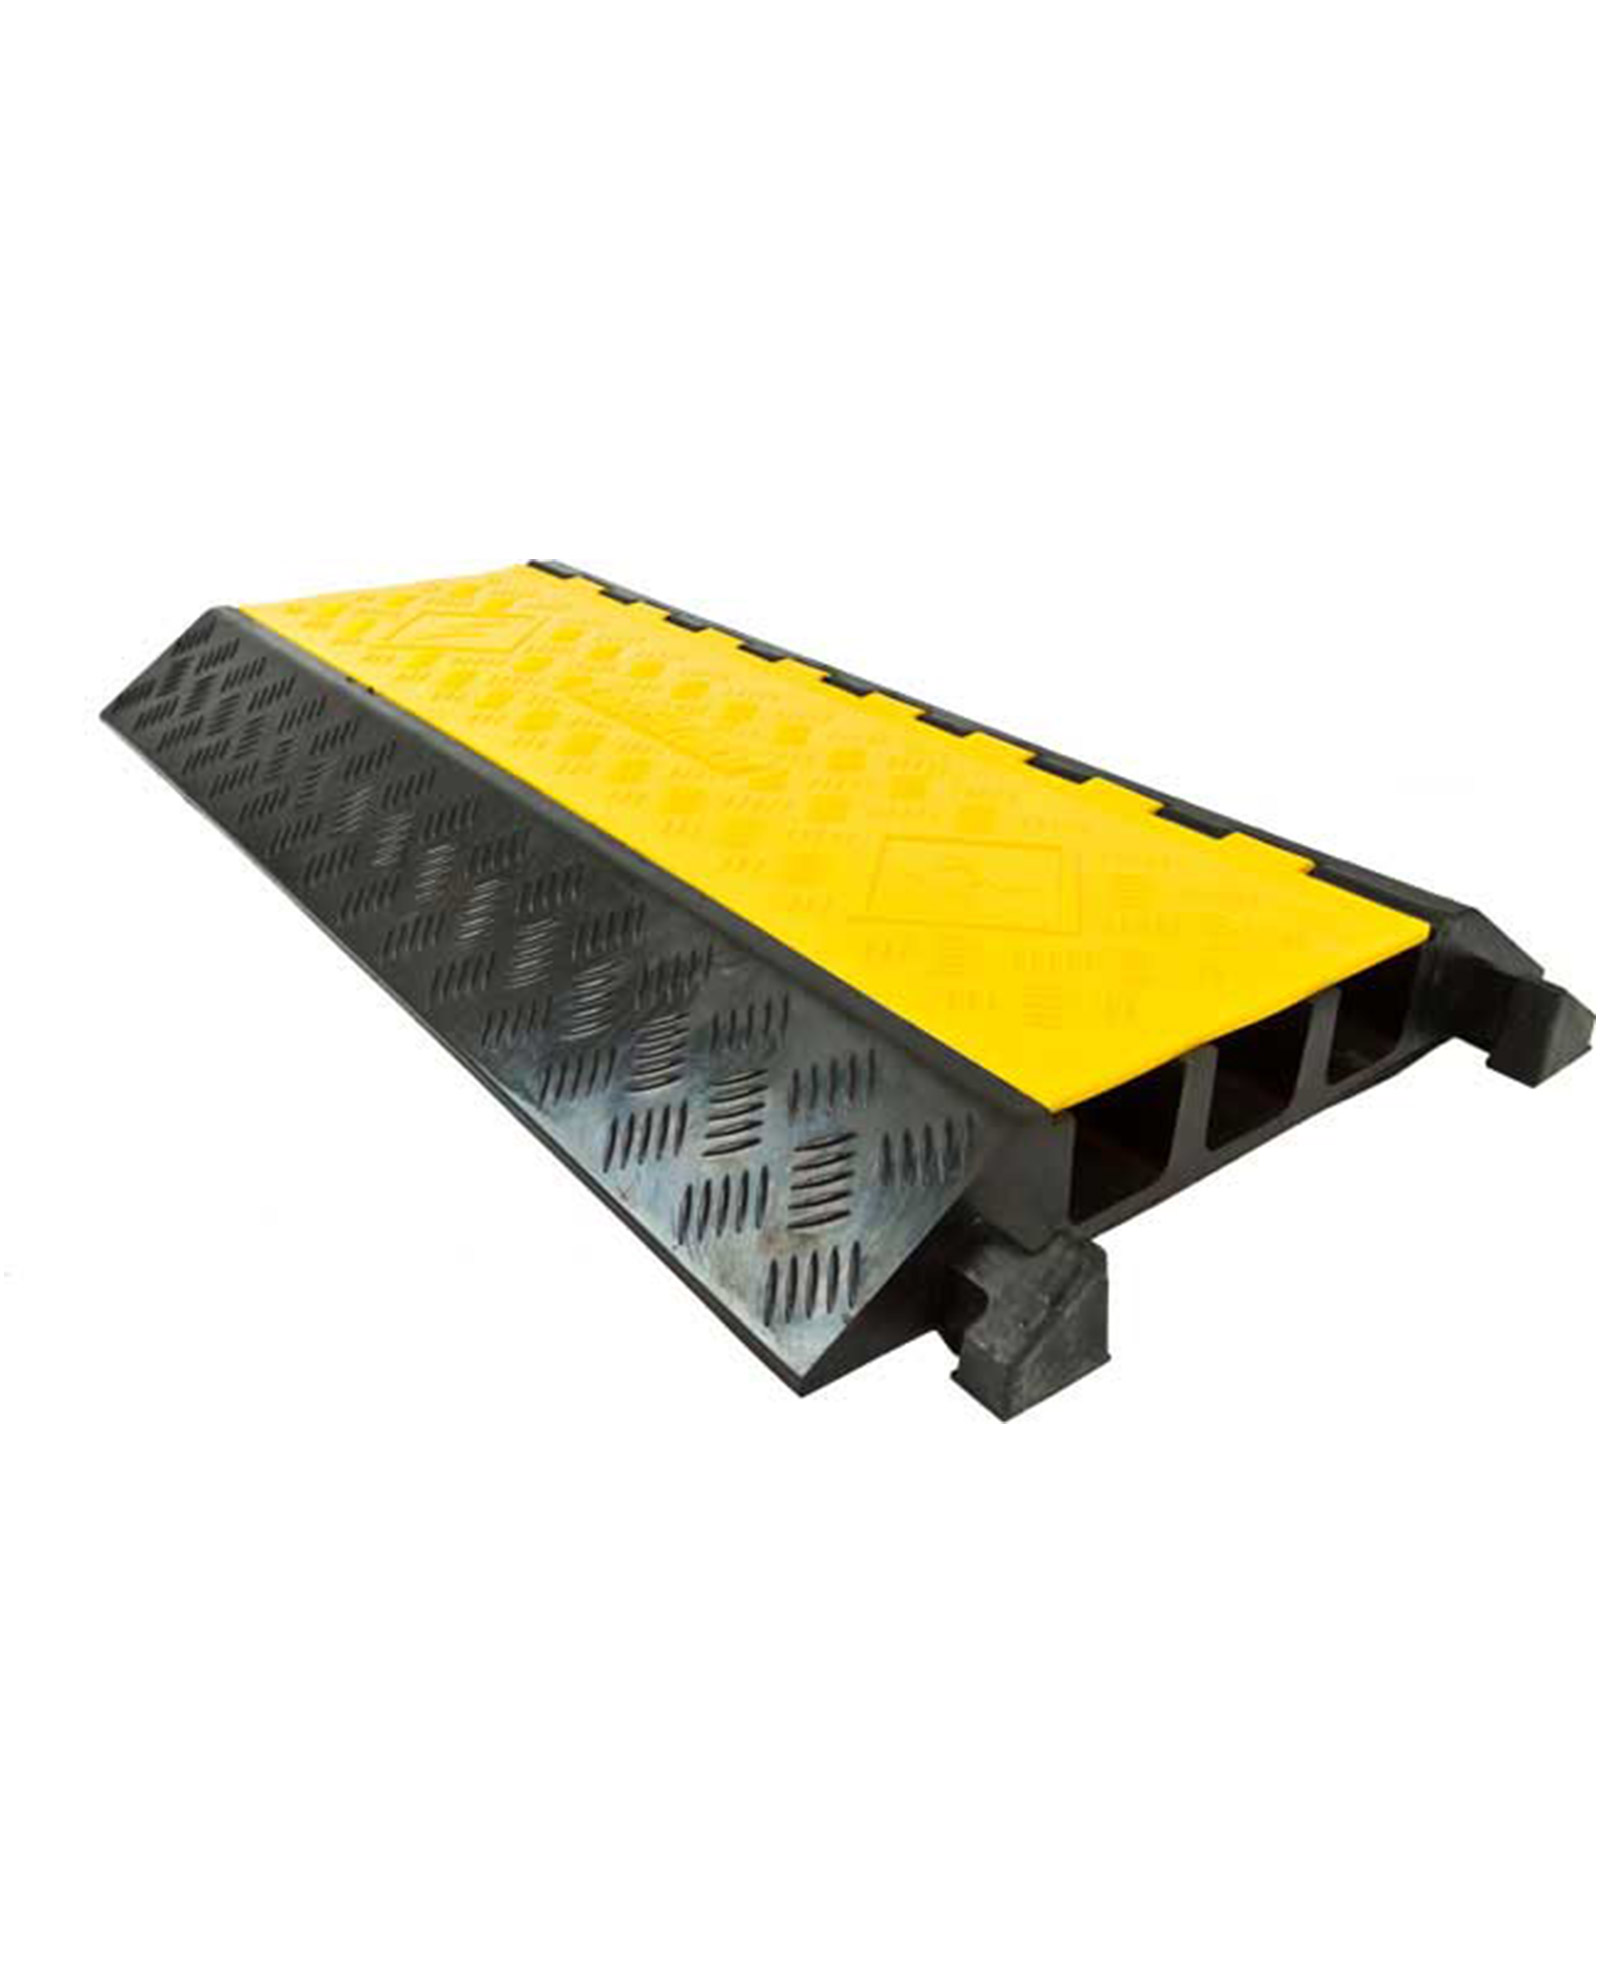 Cable Ramp Protector 3 Channel Traffic Duty